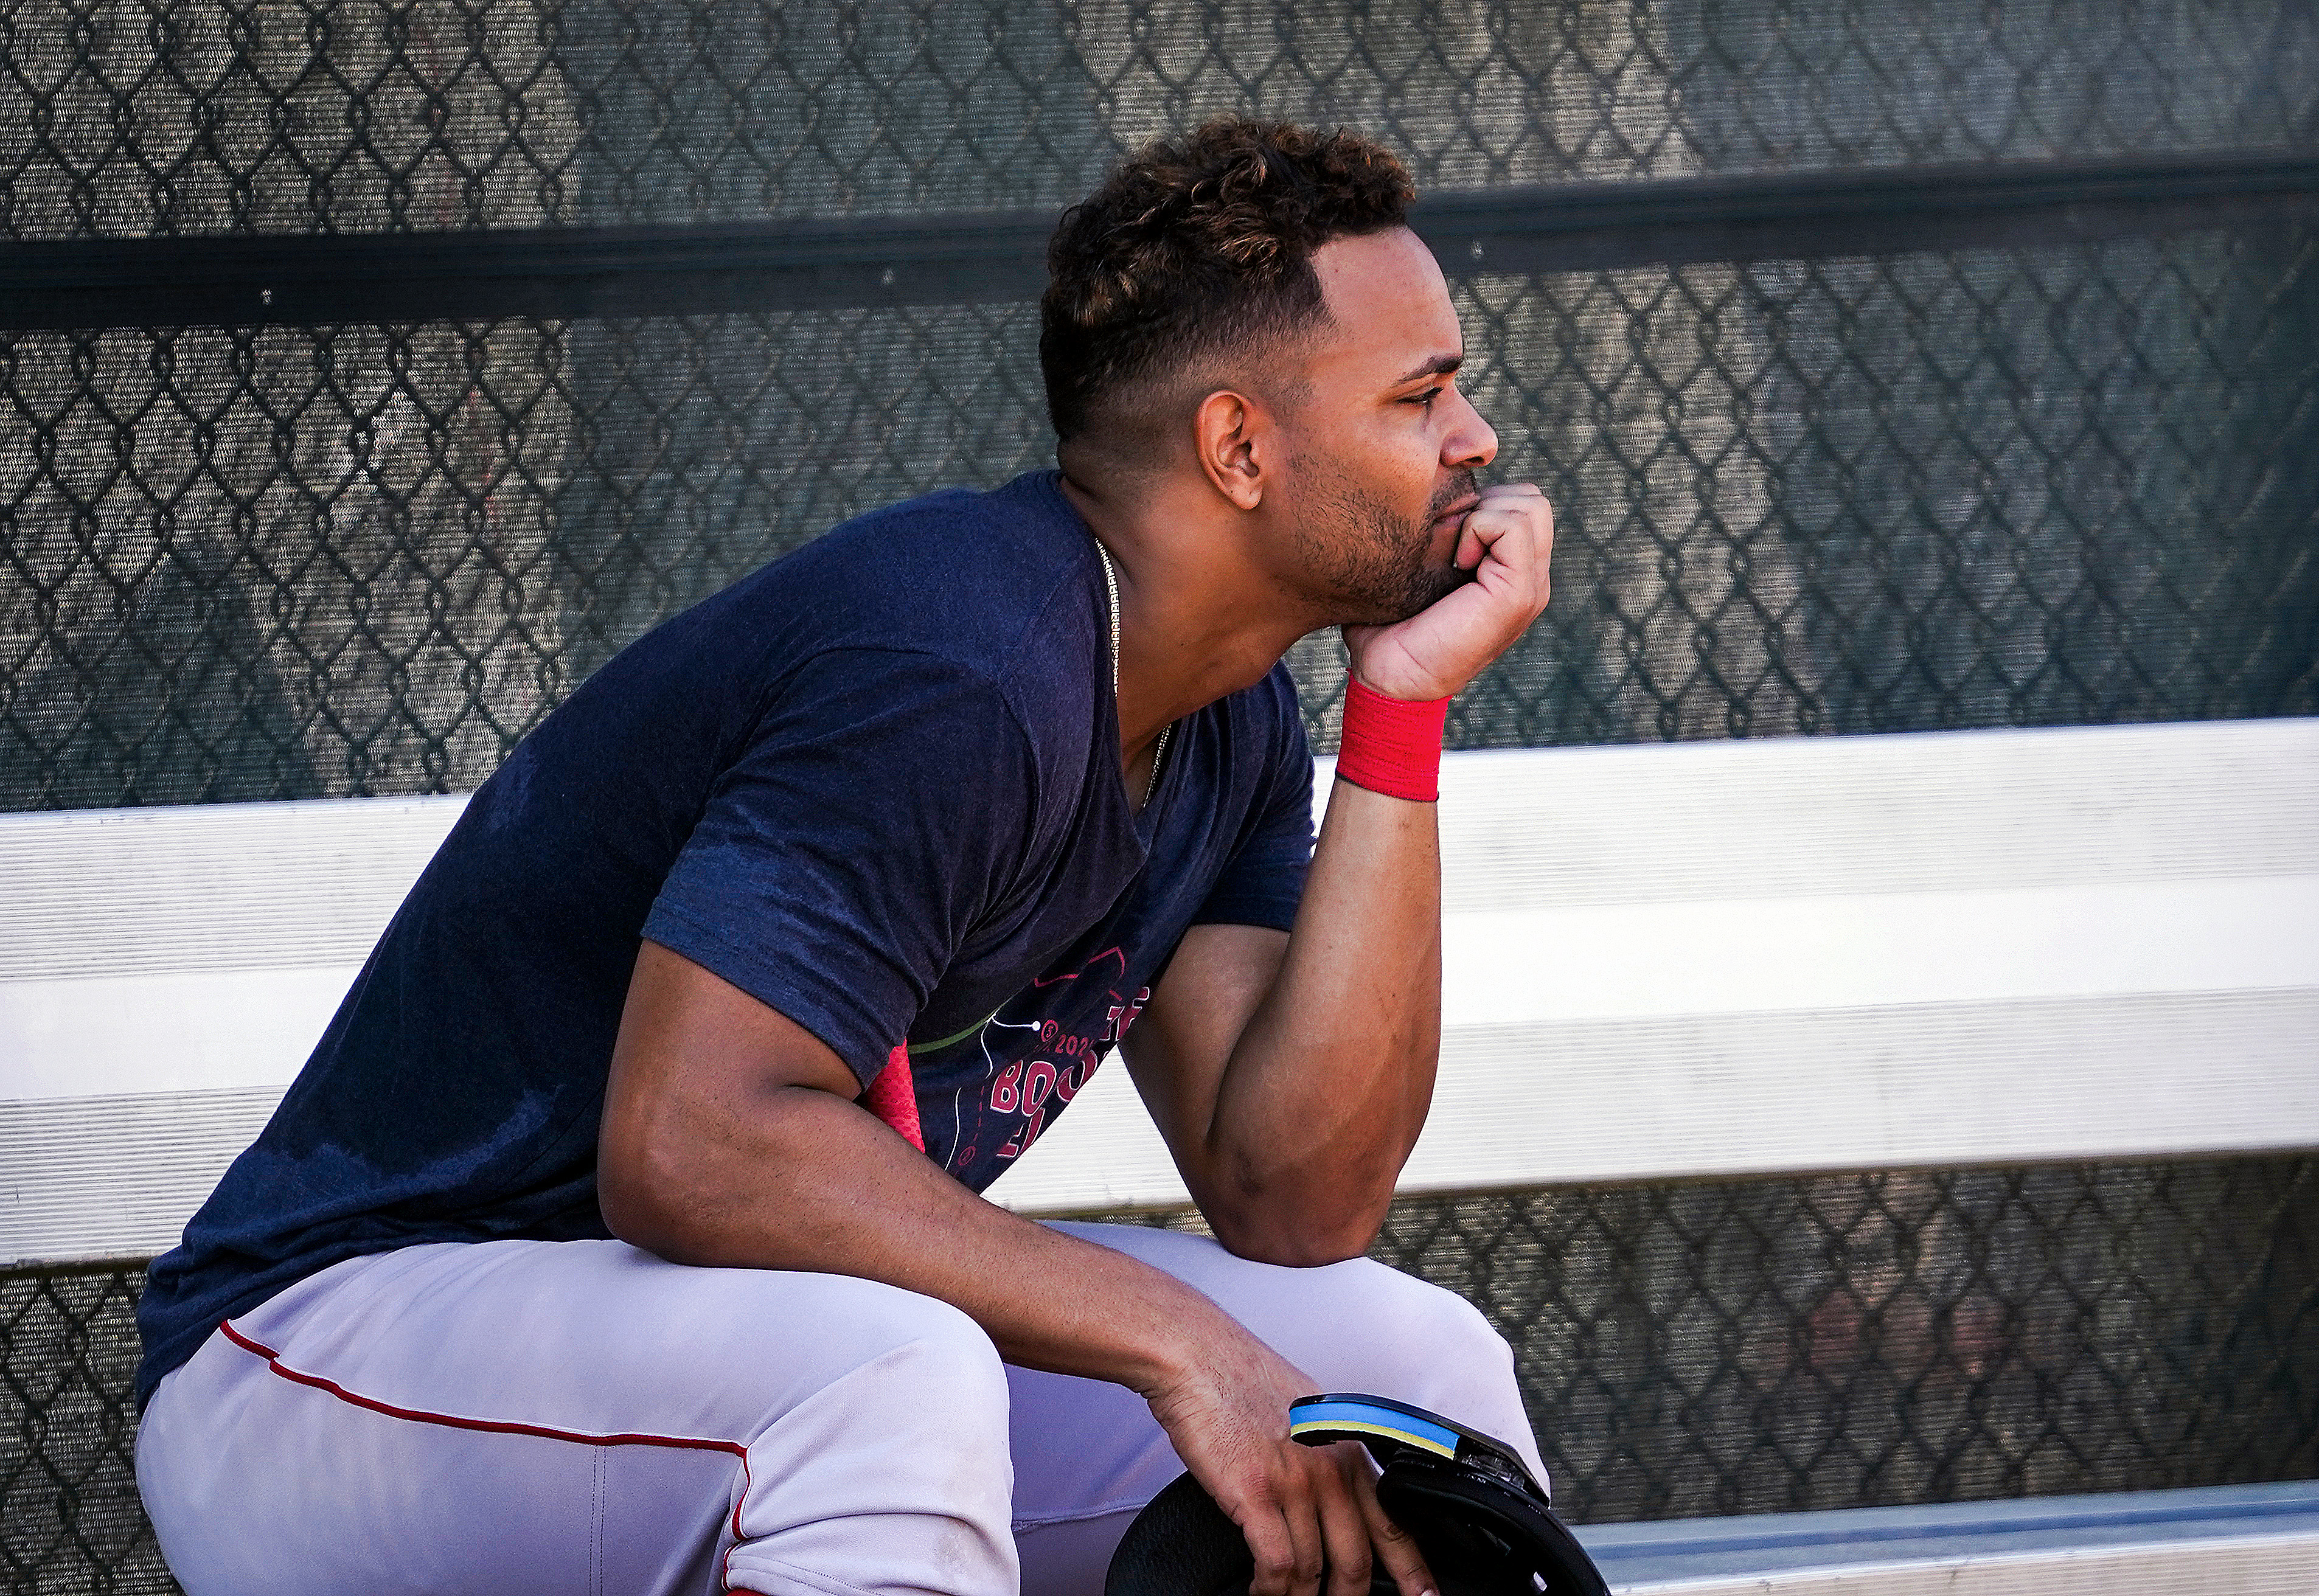 A Xander Bogaerts contract extension with the Red Sox is getting